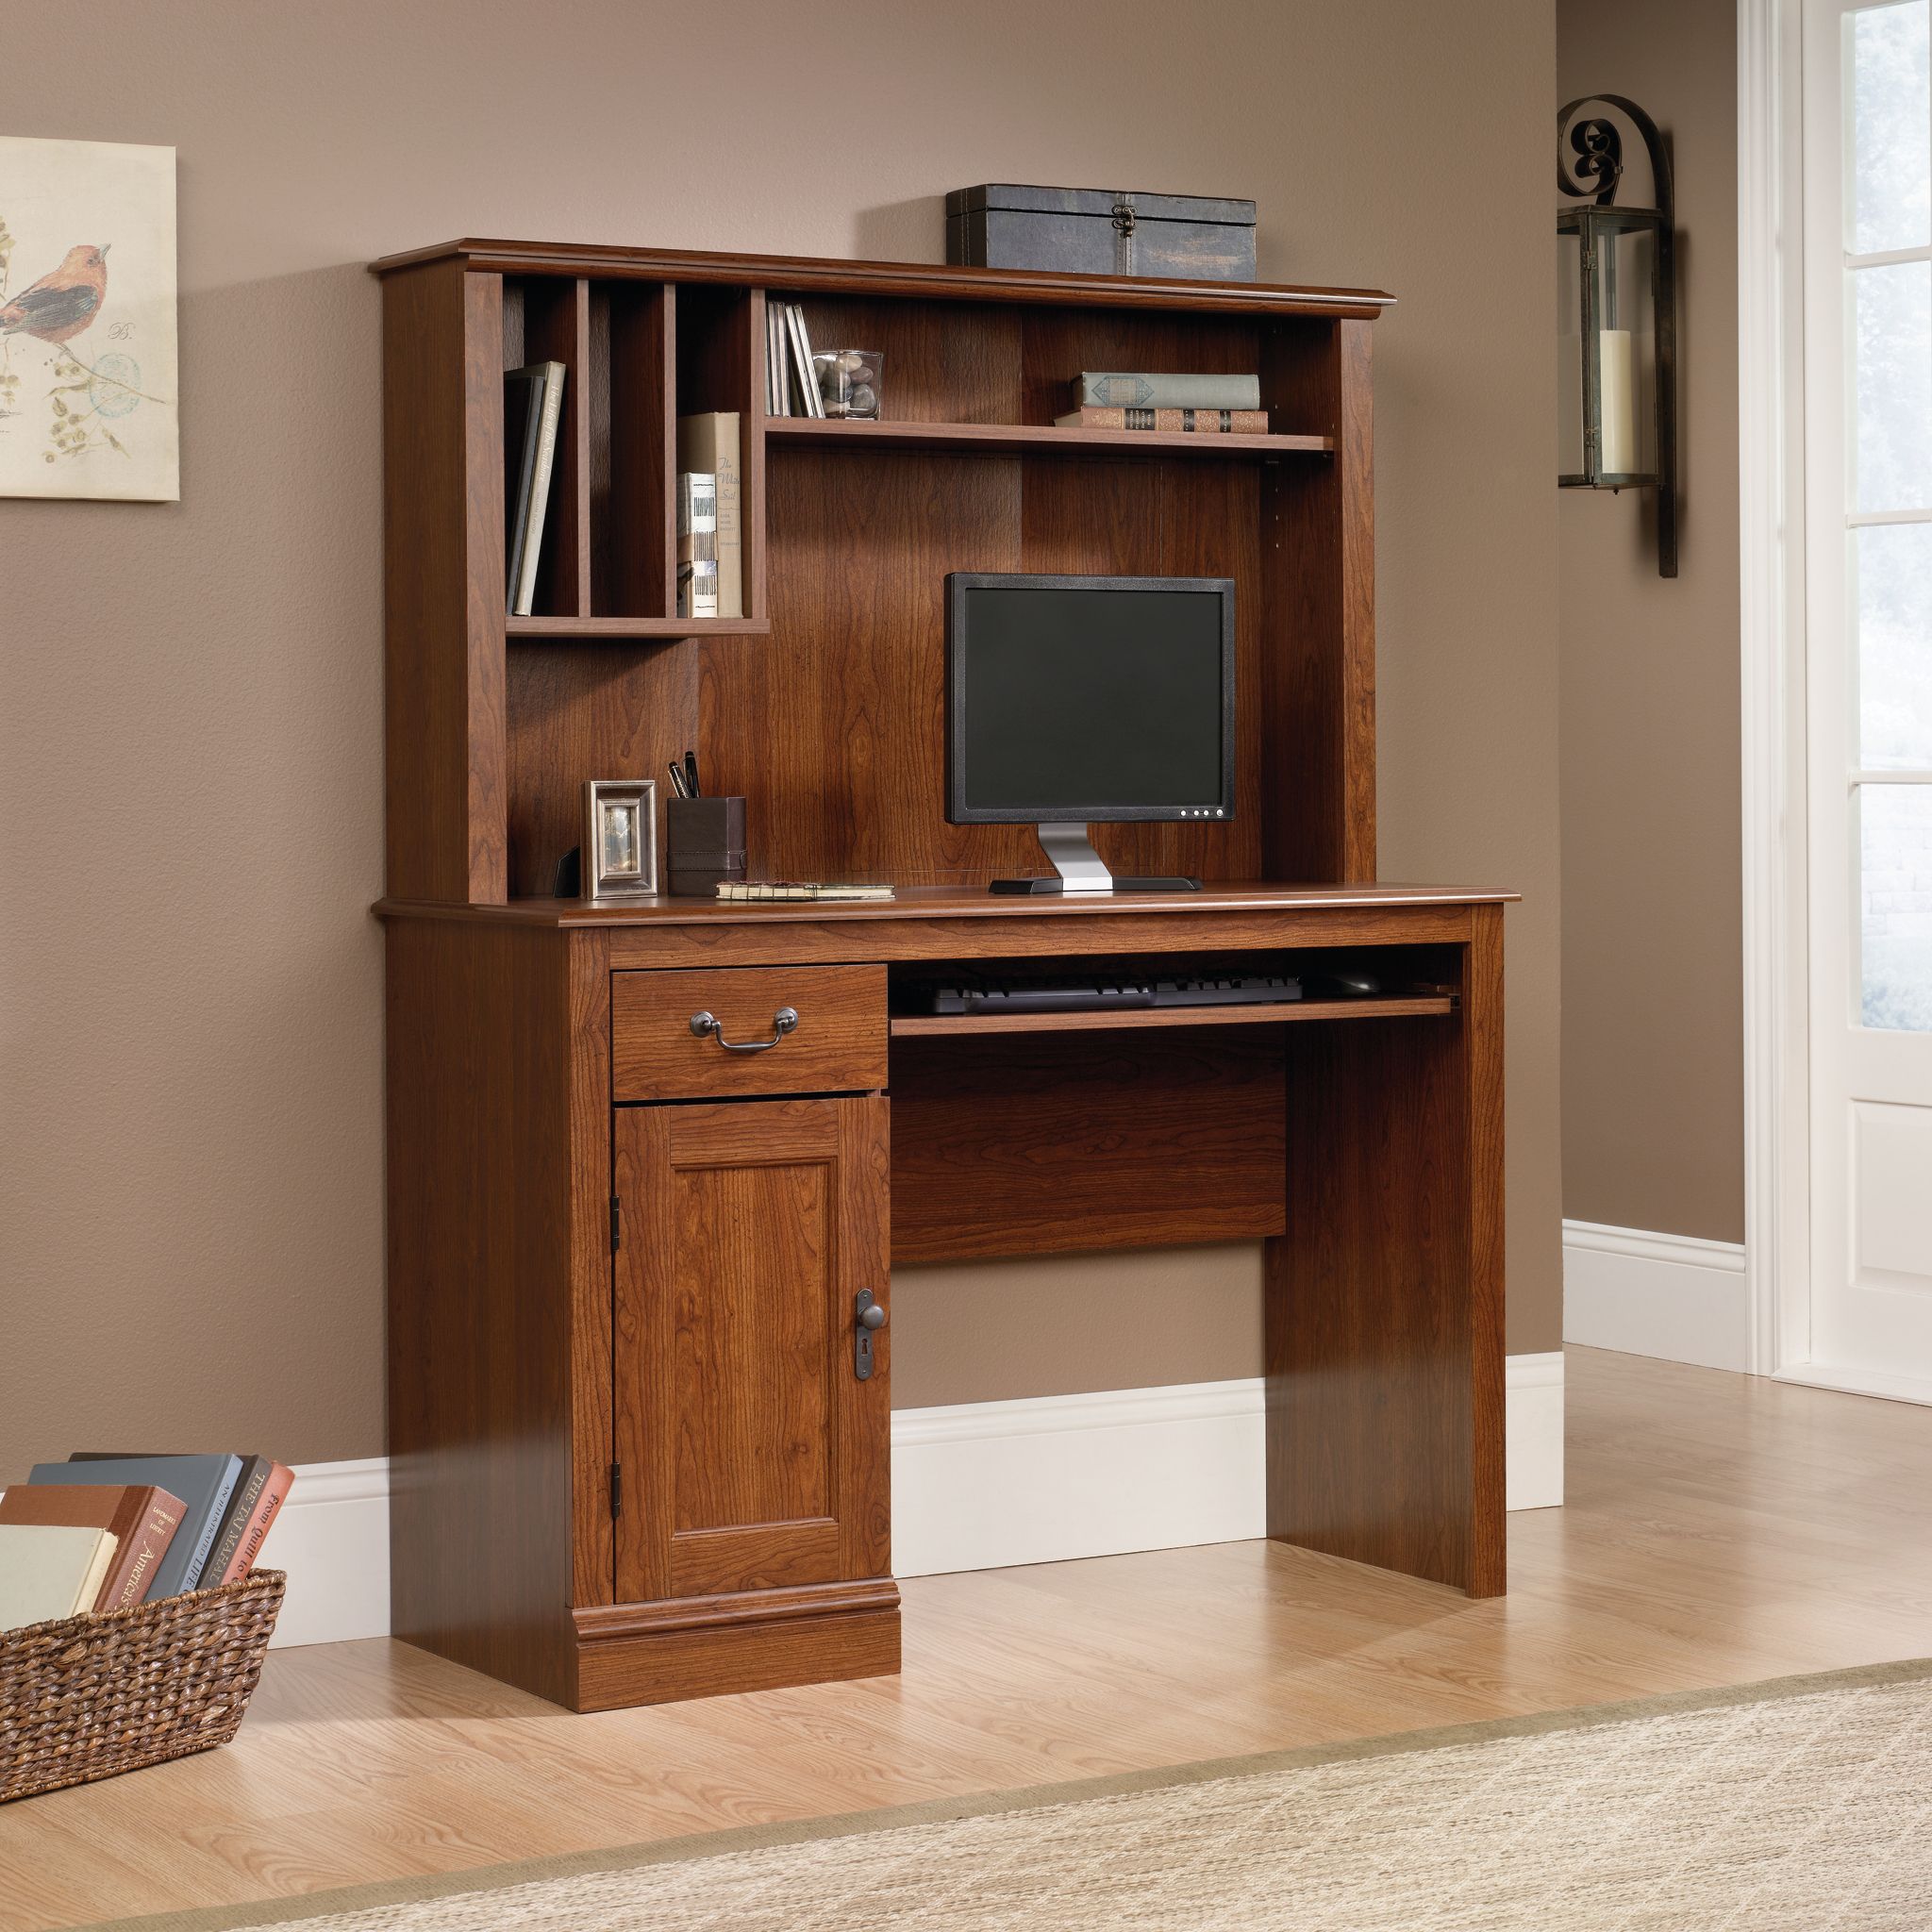 Sauder Camden County Computer Desk w/Hutch, Planked Cherry Finish - image 3 of 6